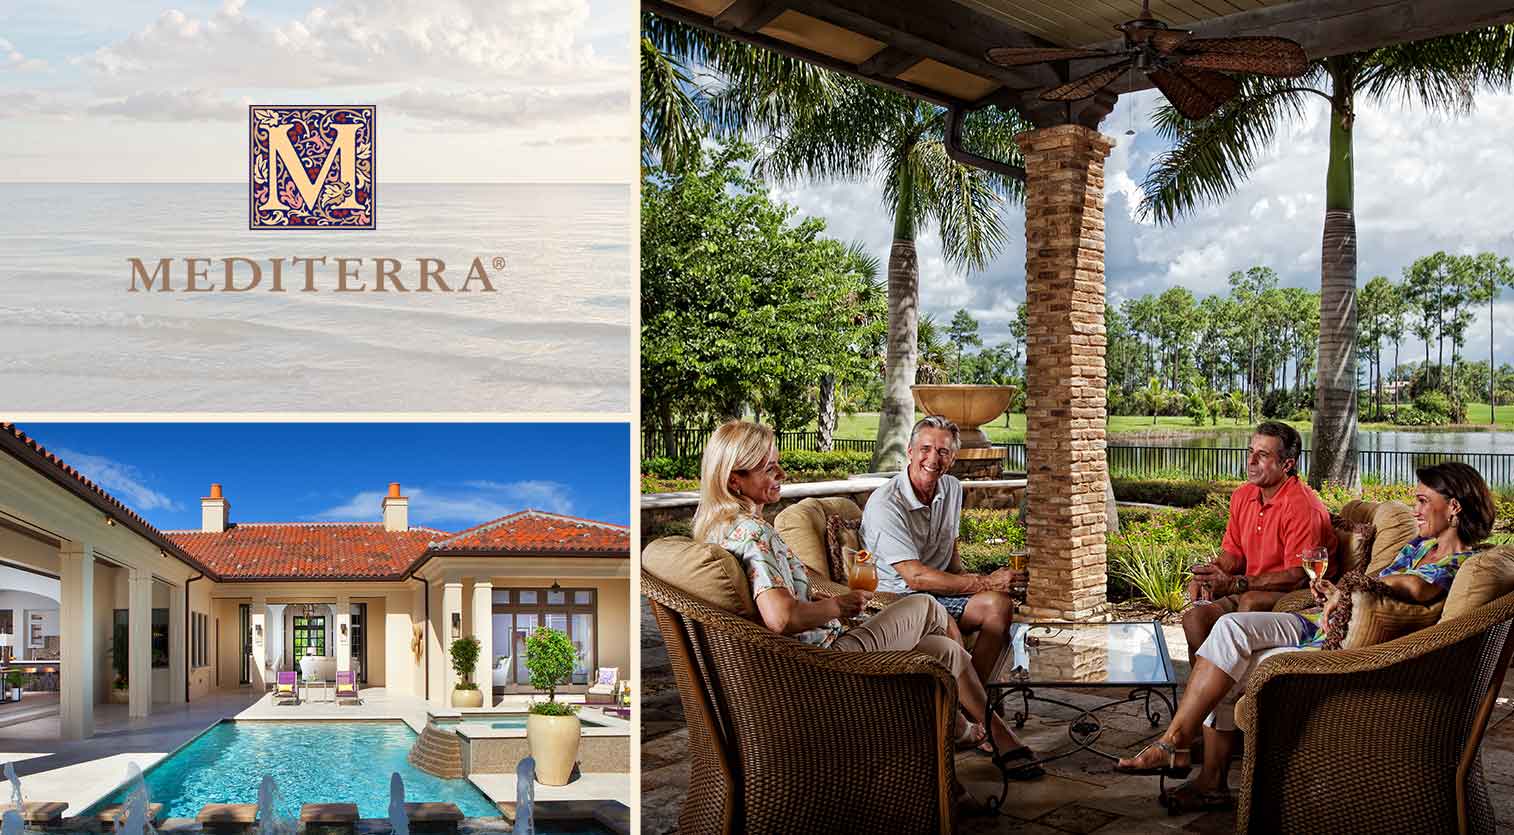 Want to know more about the Mediterra lifestyle? Contact us for more info.